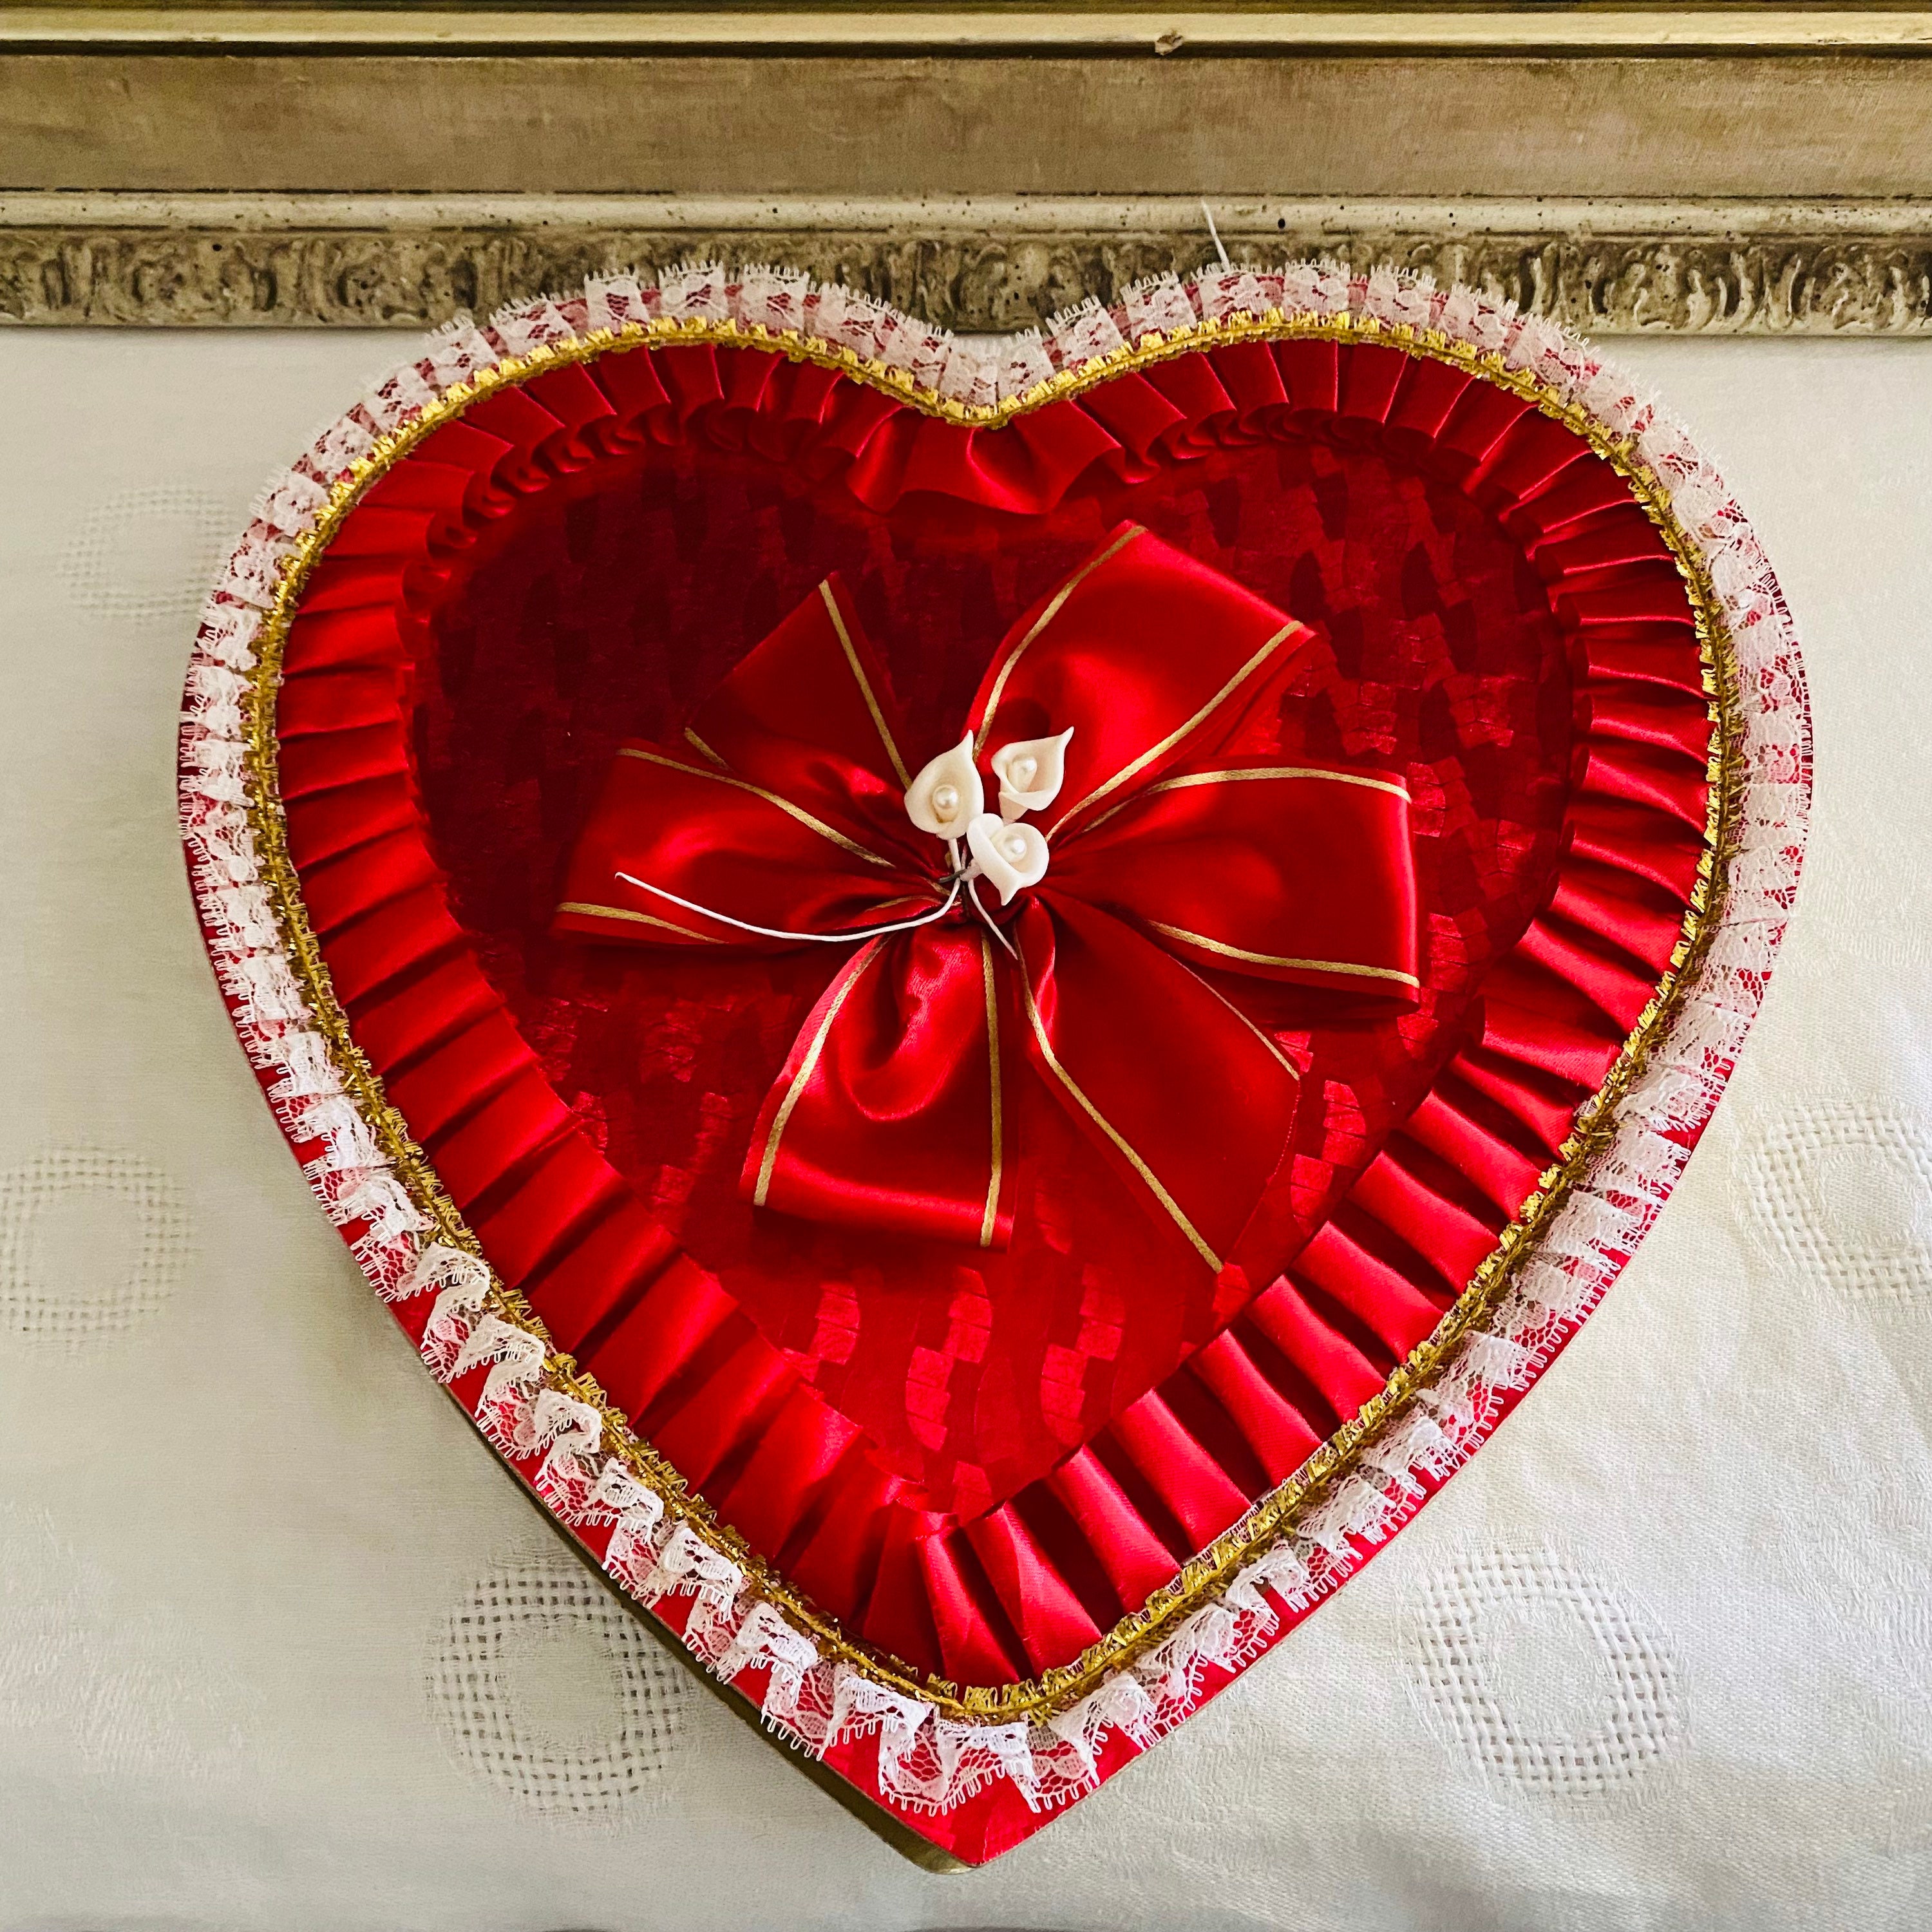 Large Vintage Valentine Heart Candy Box Red Satin and Flowers